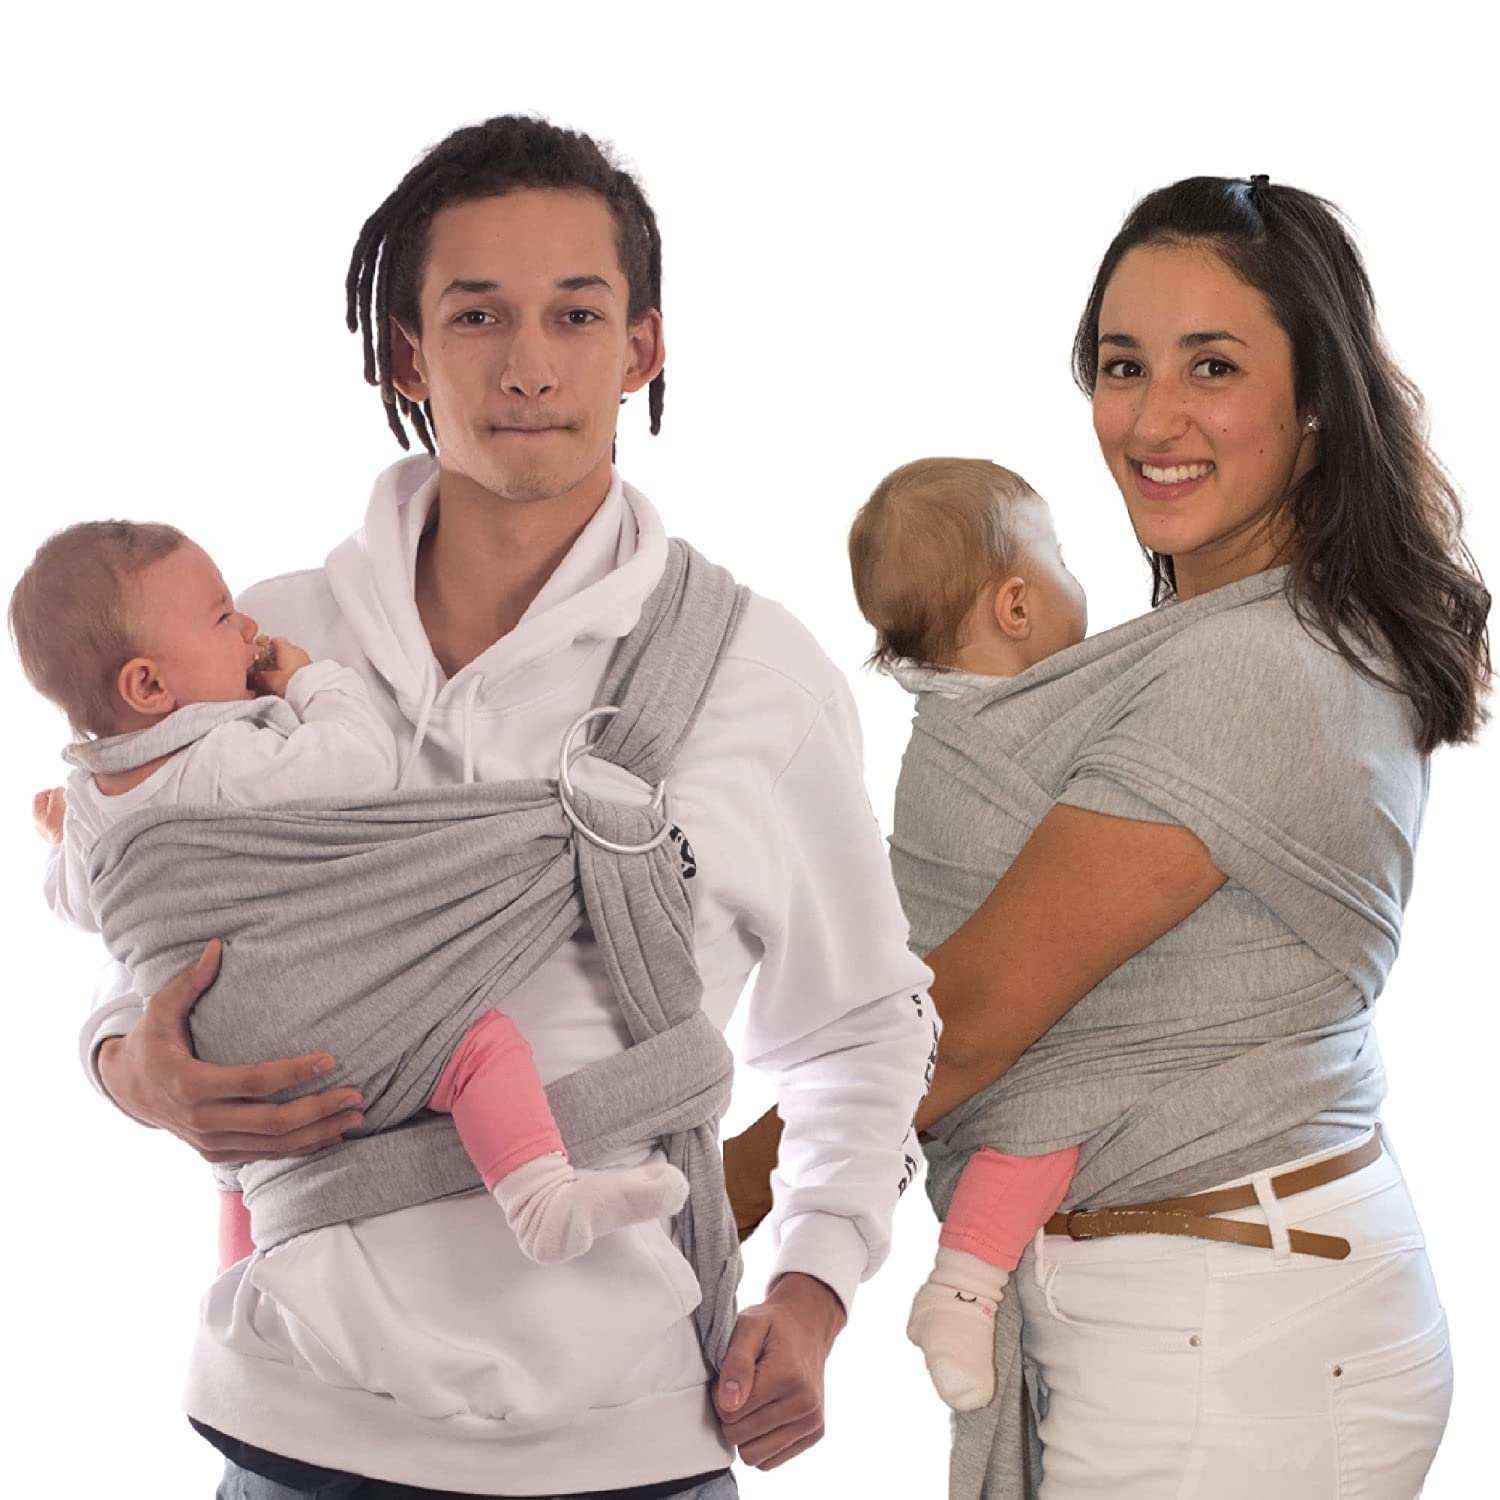 Baby Sling & Ring Sling 2 in 1 Elastic Baby Sling with Aluminium Rings for Newborns Baby Carrier & Carrying Aid with Carrying Instructions BabyBino Wrap The Perfect Gift (Light Grey)